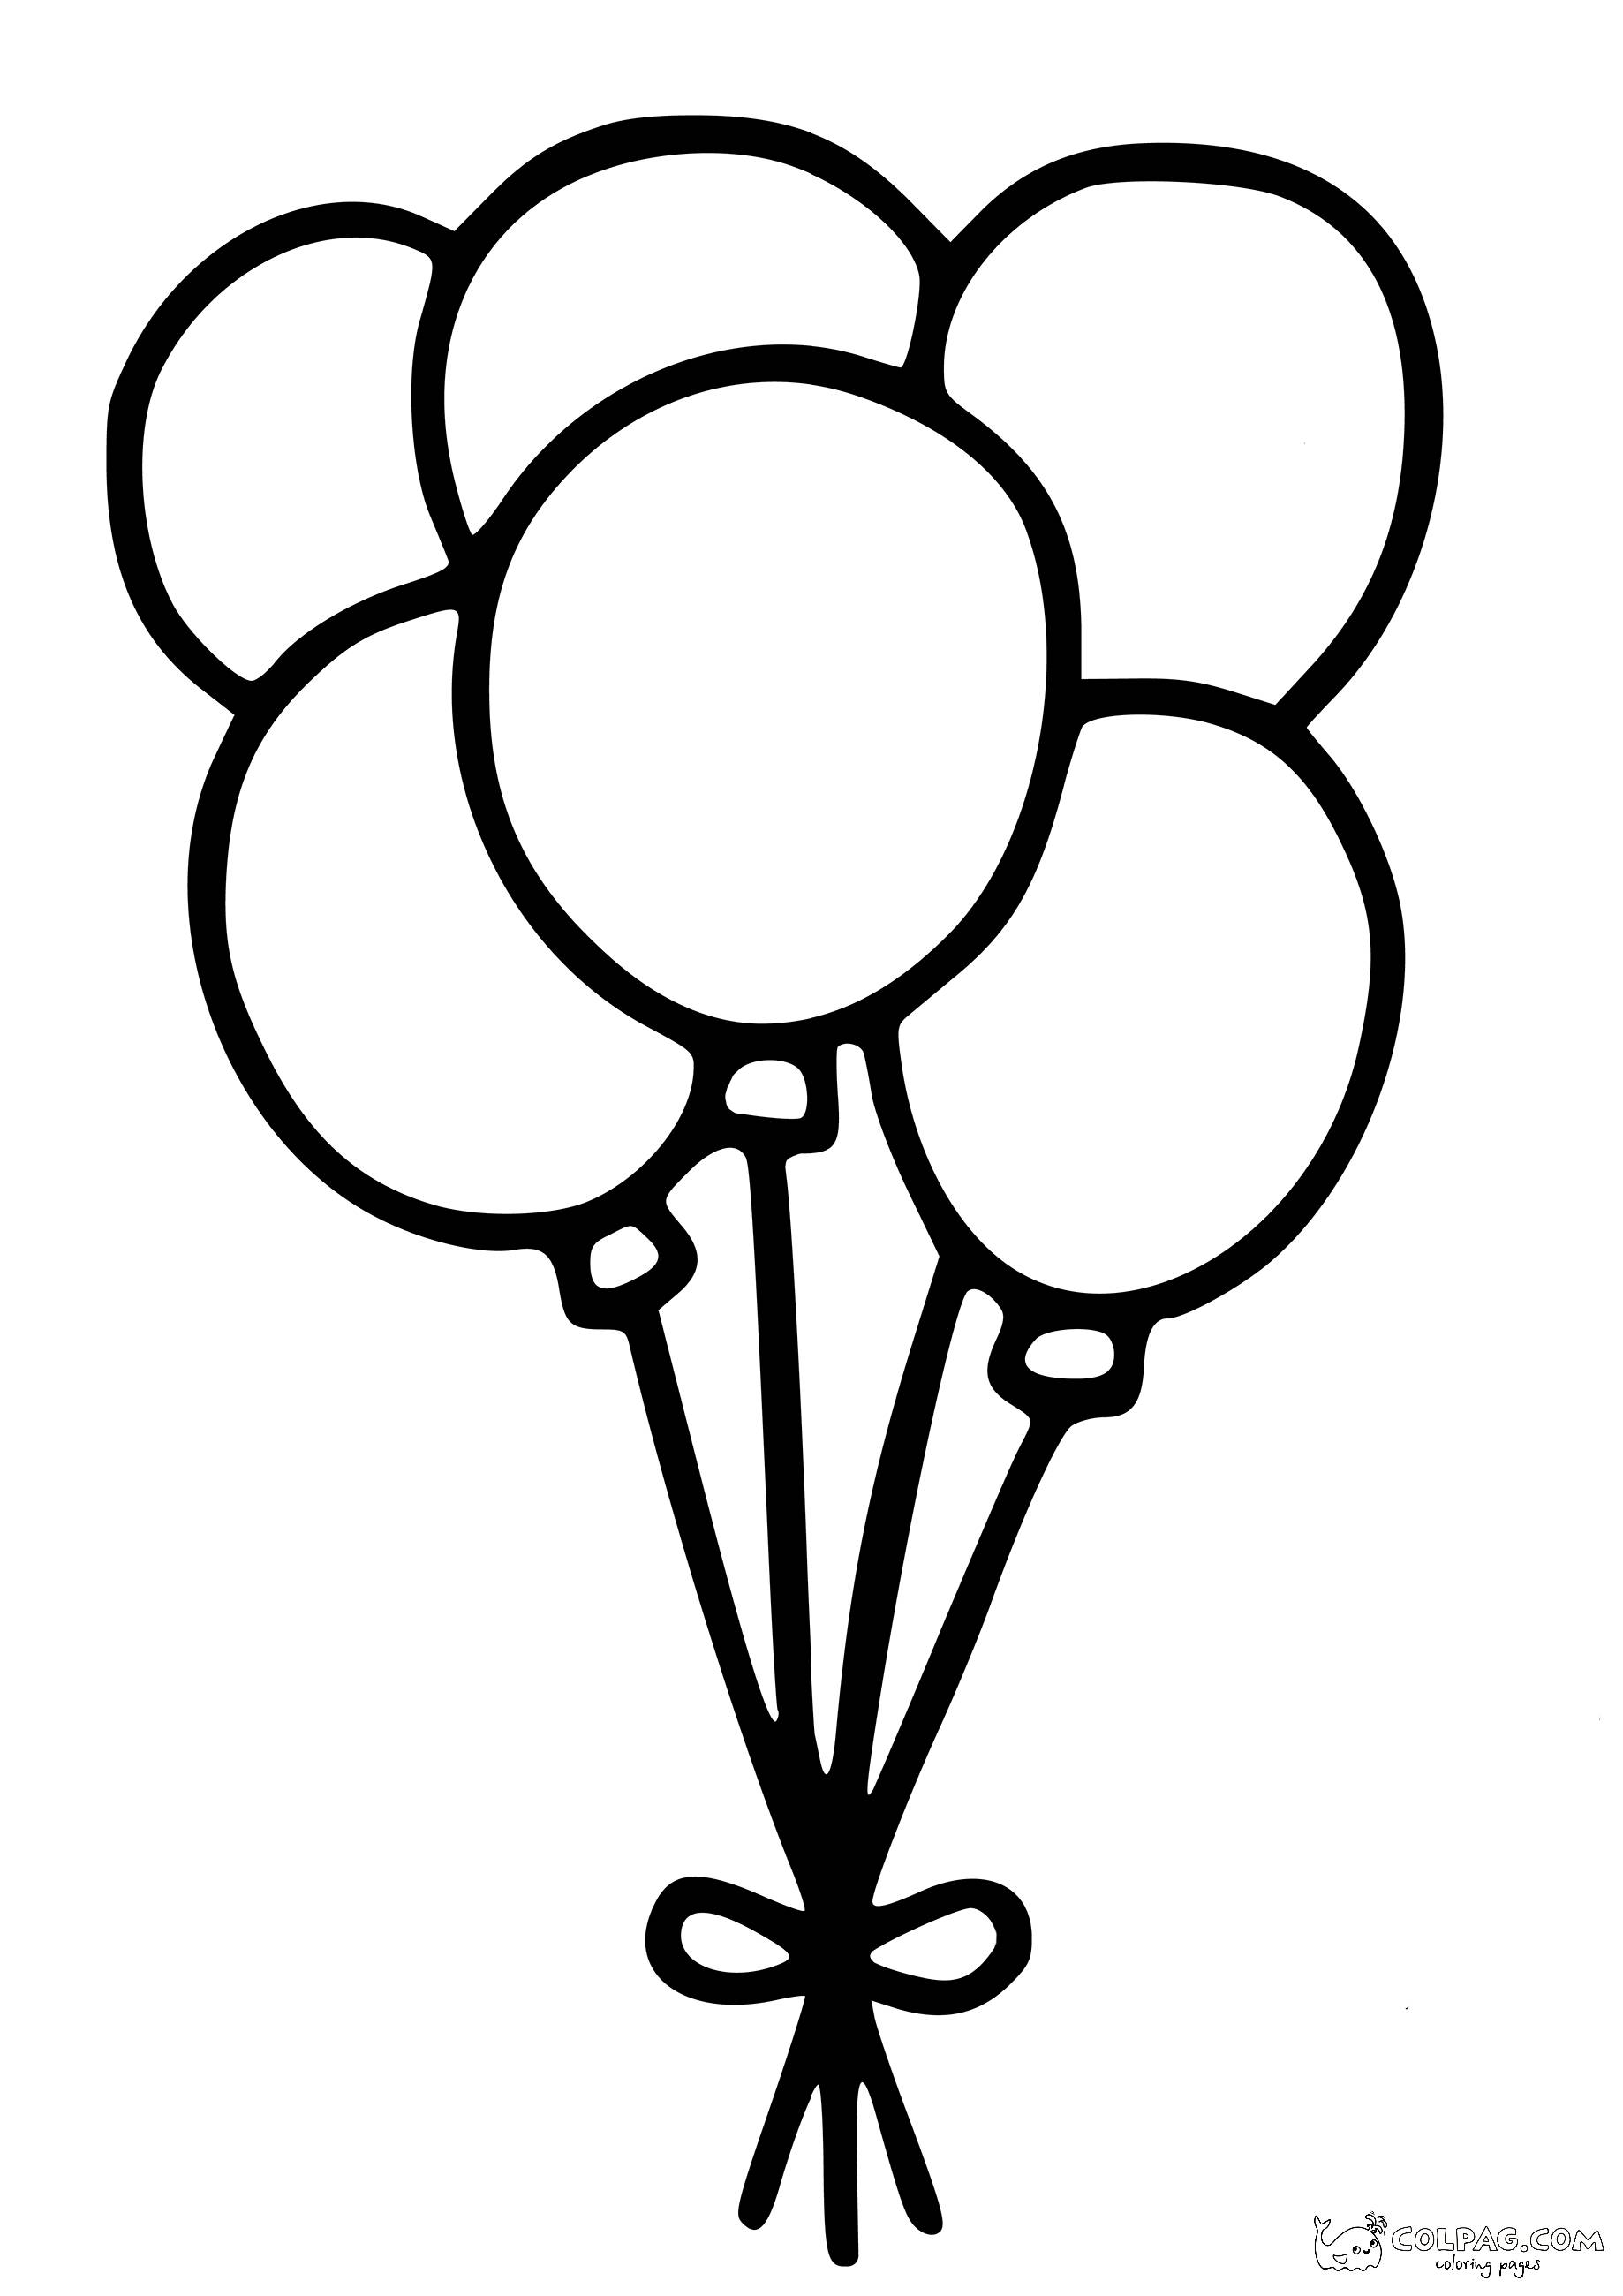 4-minimalistic-baloons-coloring-page-colpag-4